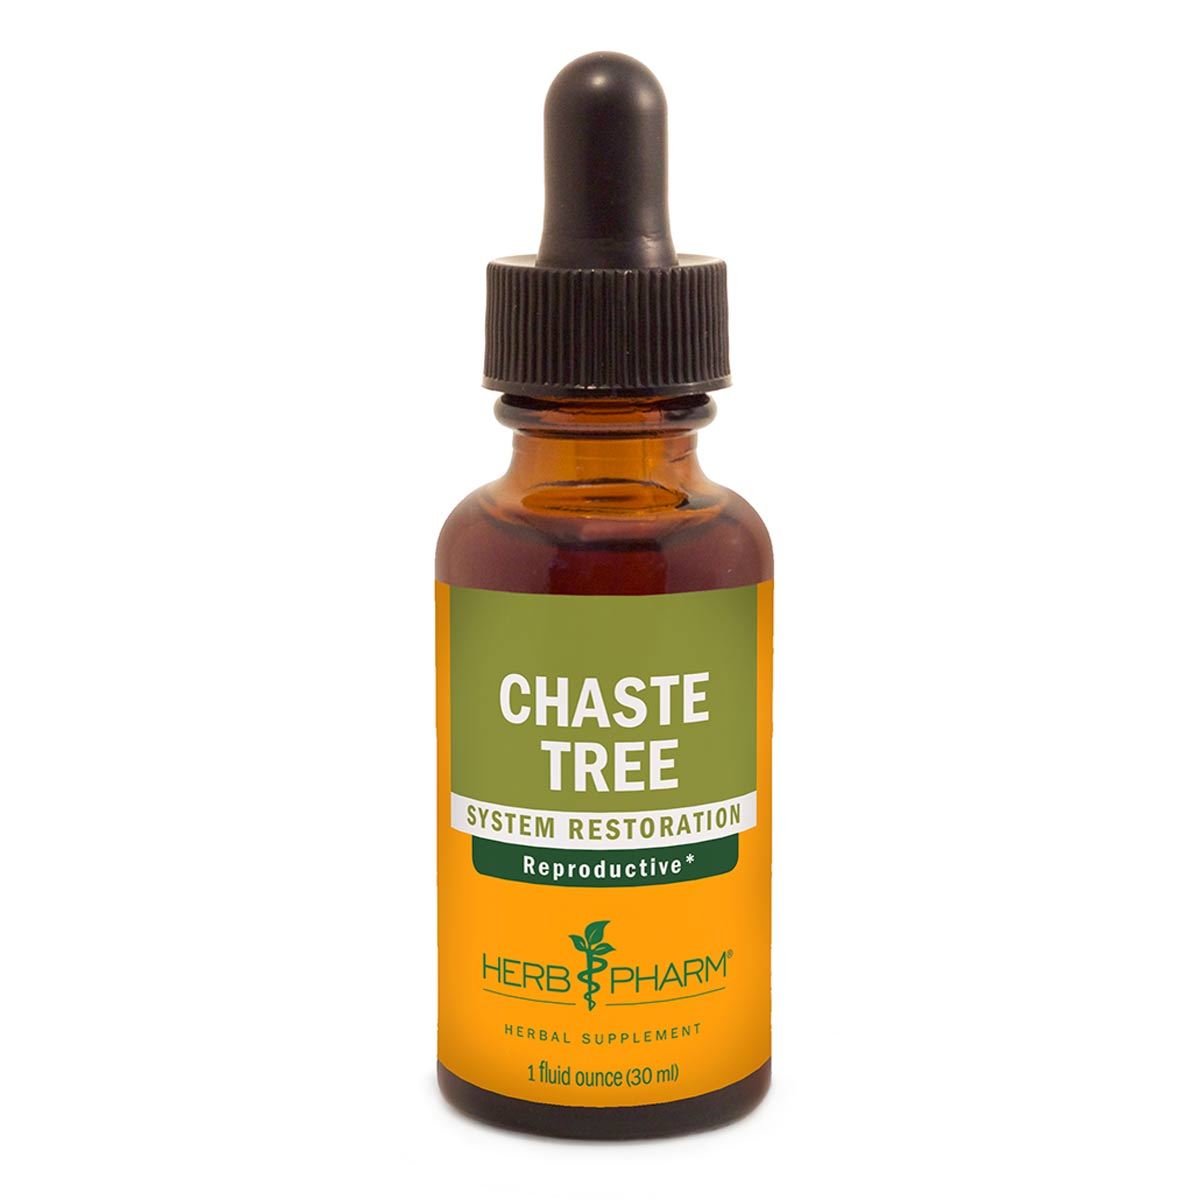 Primary image of Chaste Tree Extract